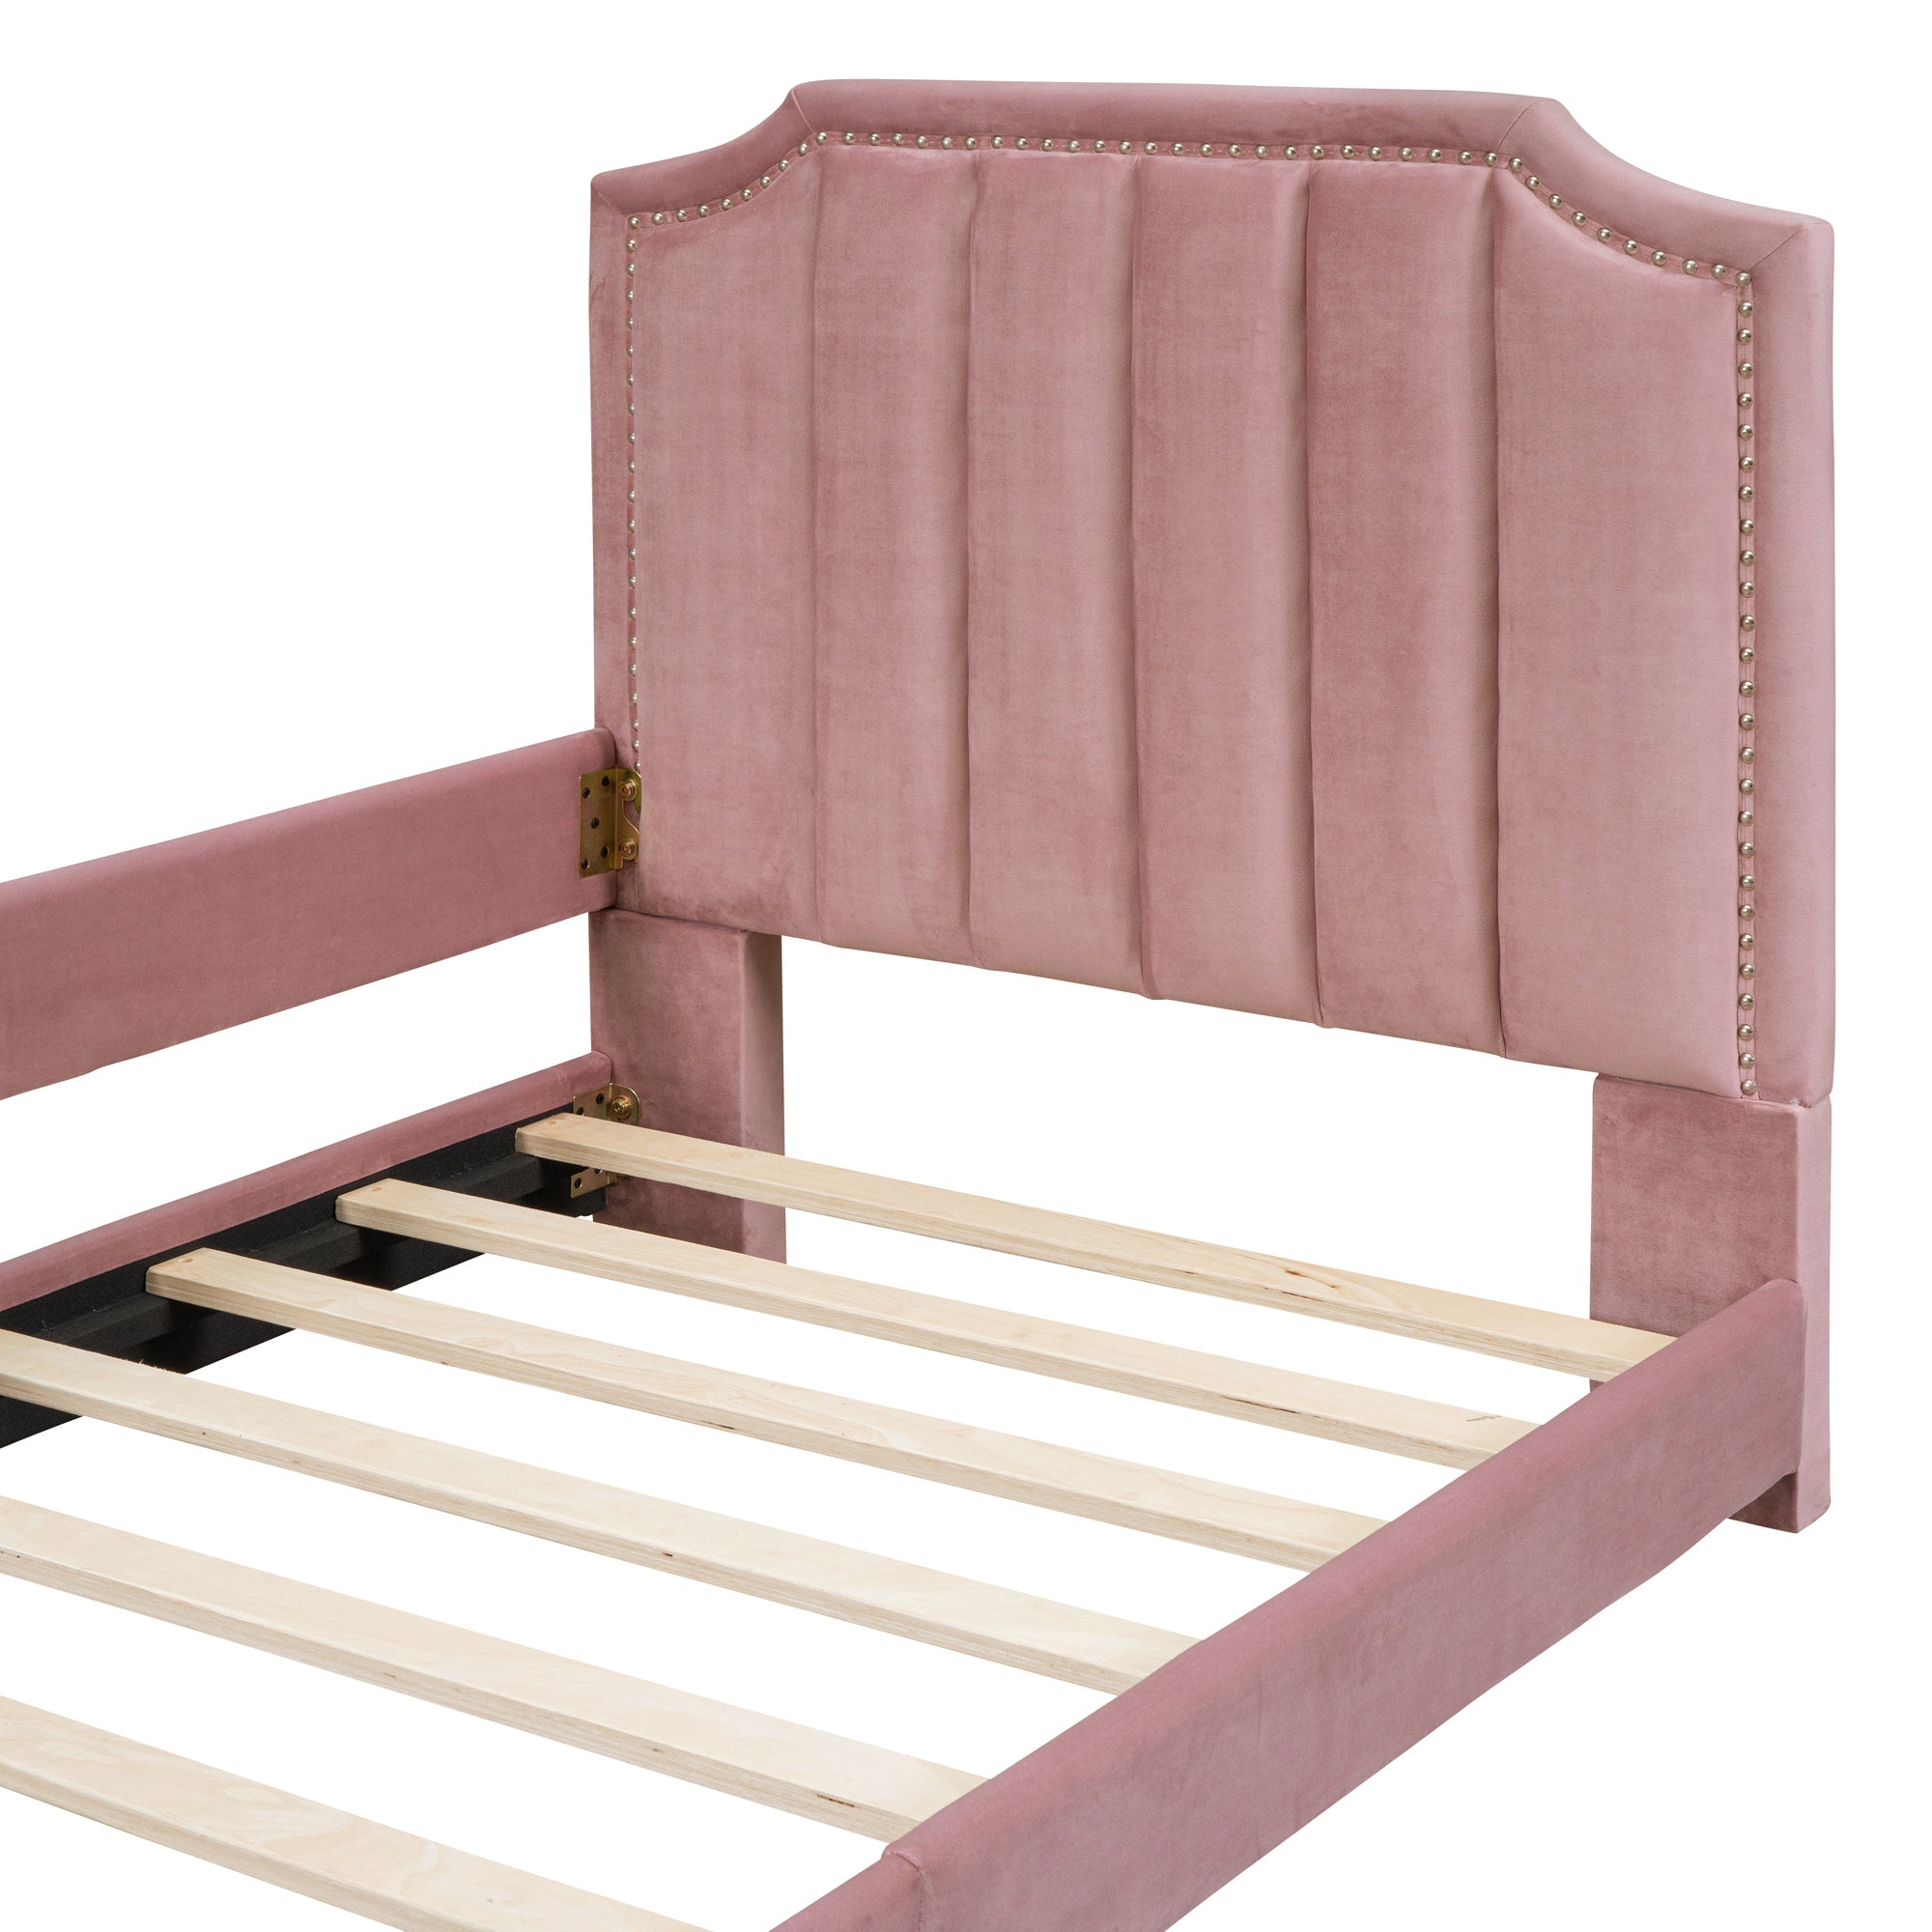 Twin Size Upholstered Daybed with Classic Stripe Shaped  Headboard - Pink